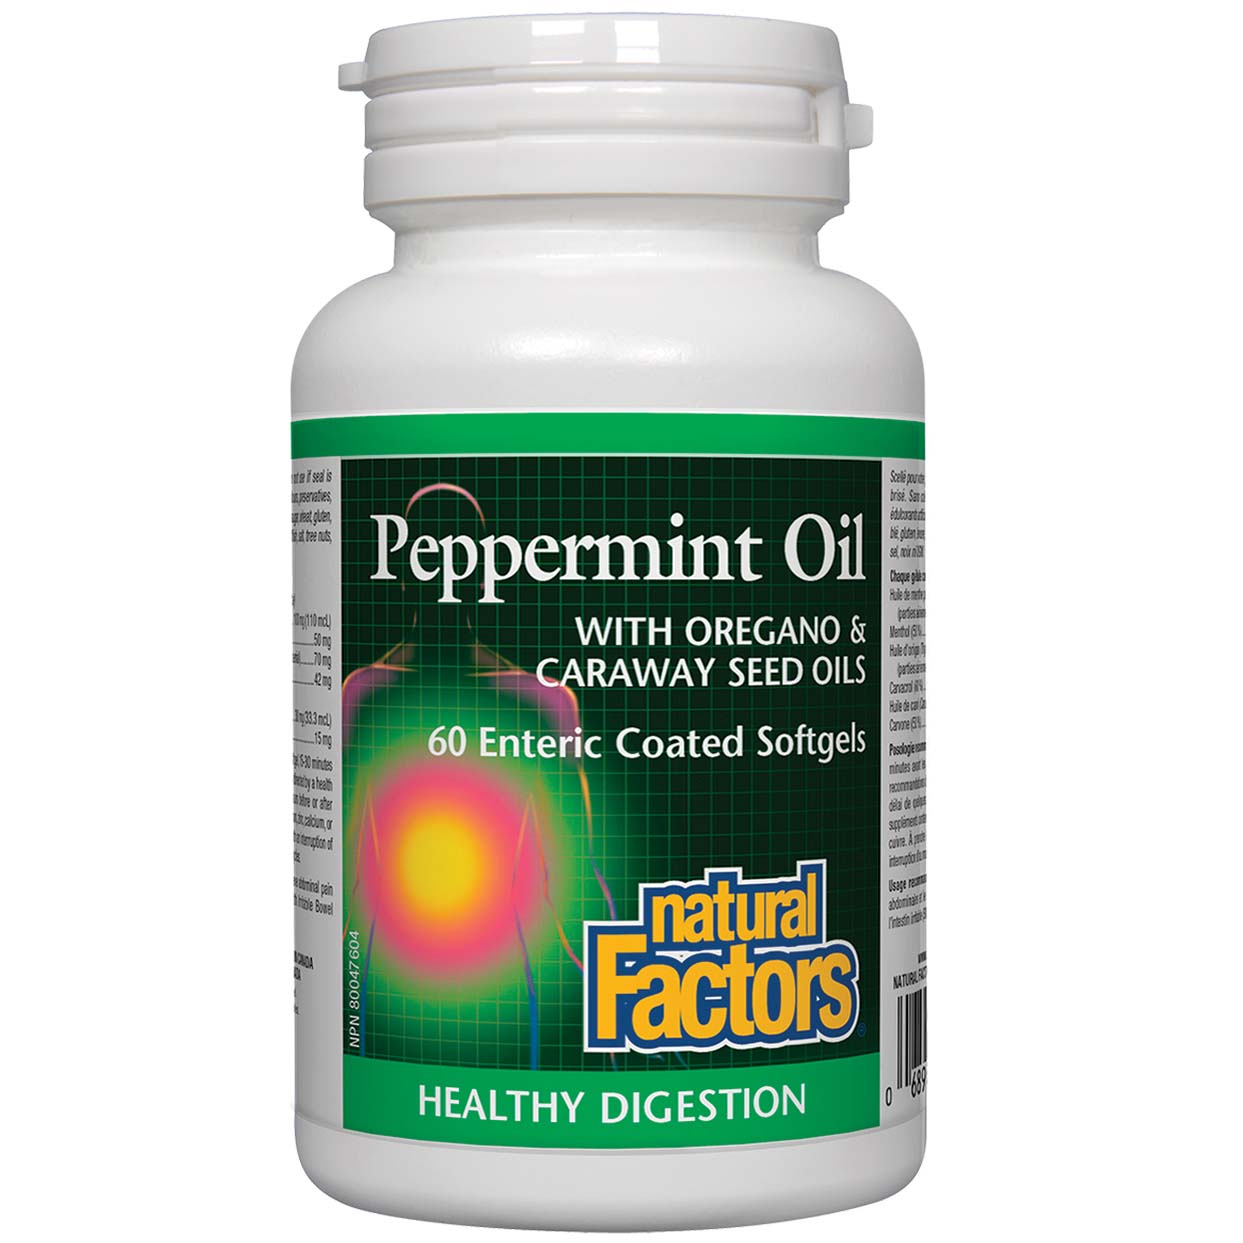 Natural Factors Peppermint Oil With Oregano and Caraway Seed, 60 Softgels